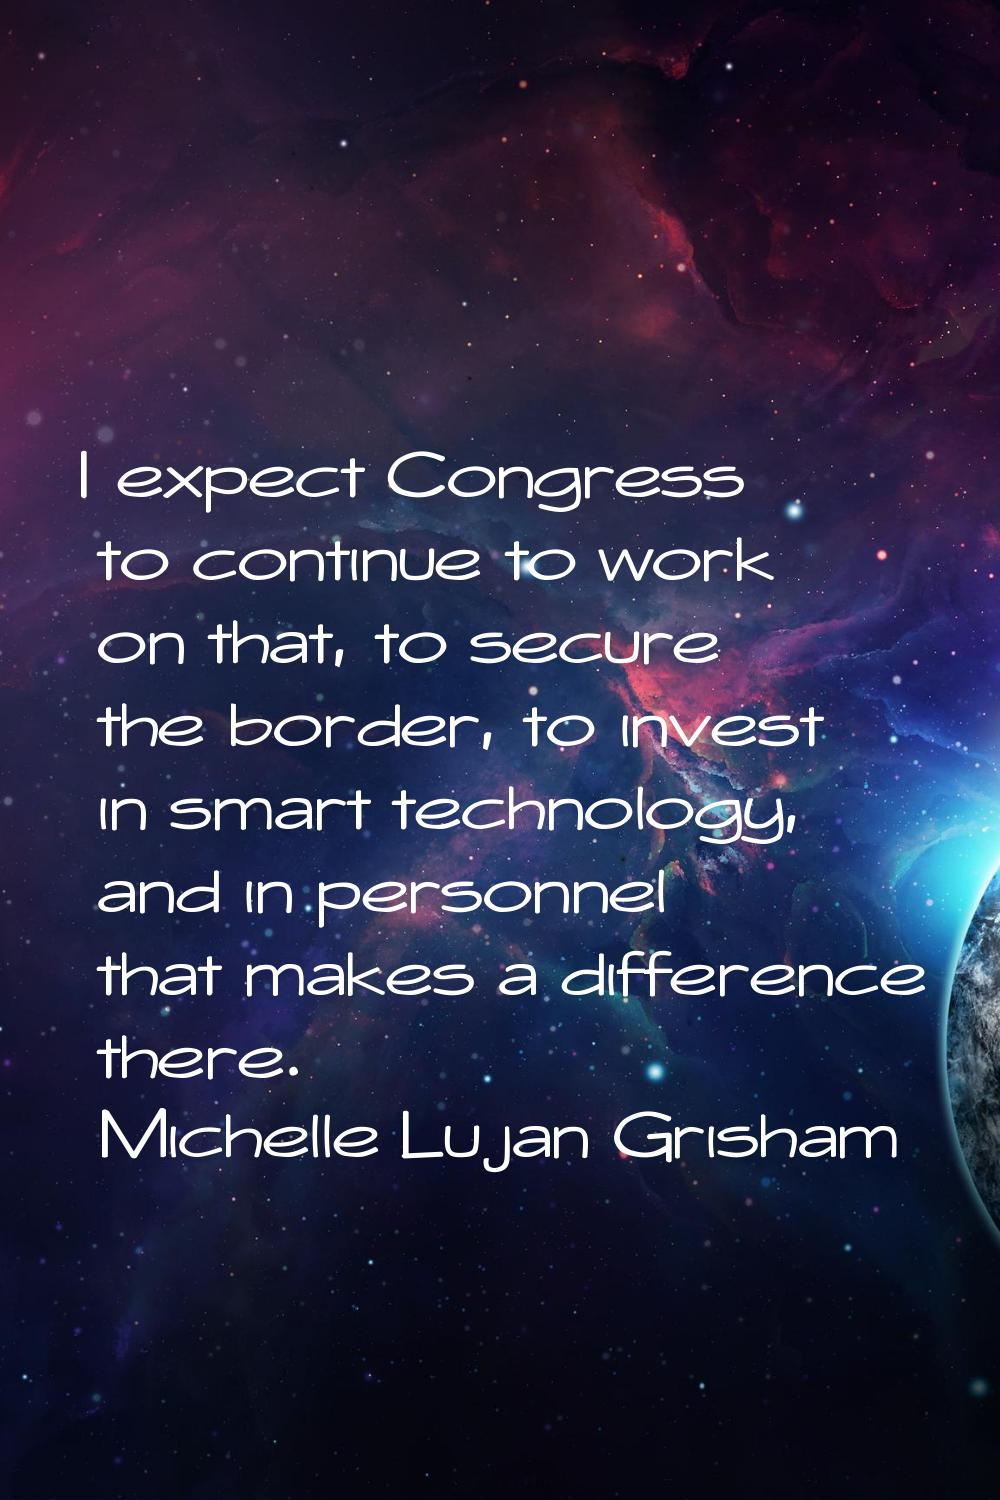 I expect Congress to continue to work on that, to secure the border, to invest in smart technology,